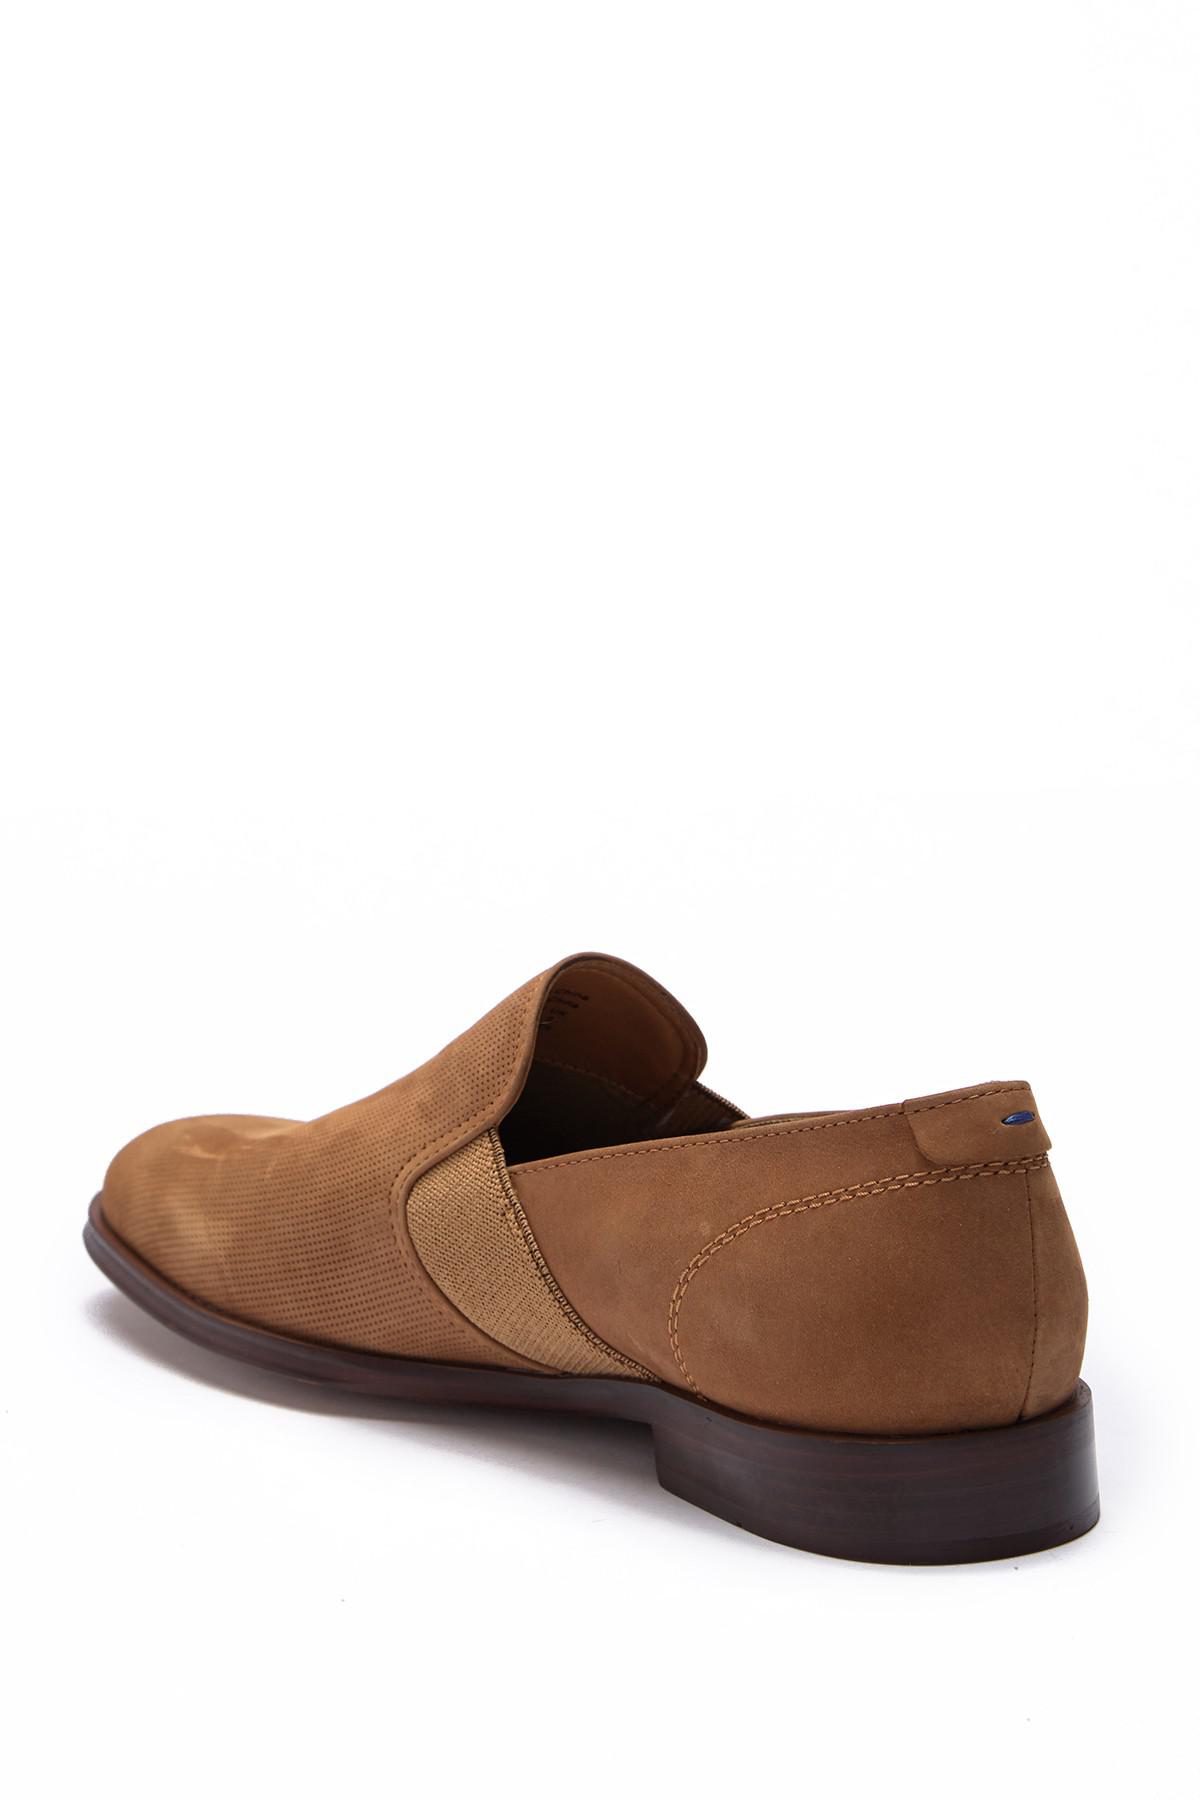 ALDO Hayni Loafer in Rust (Brown) for 